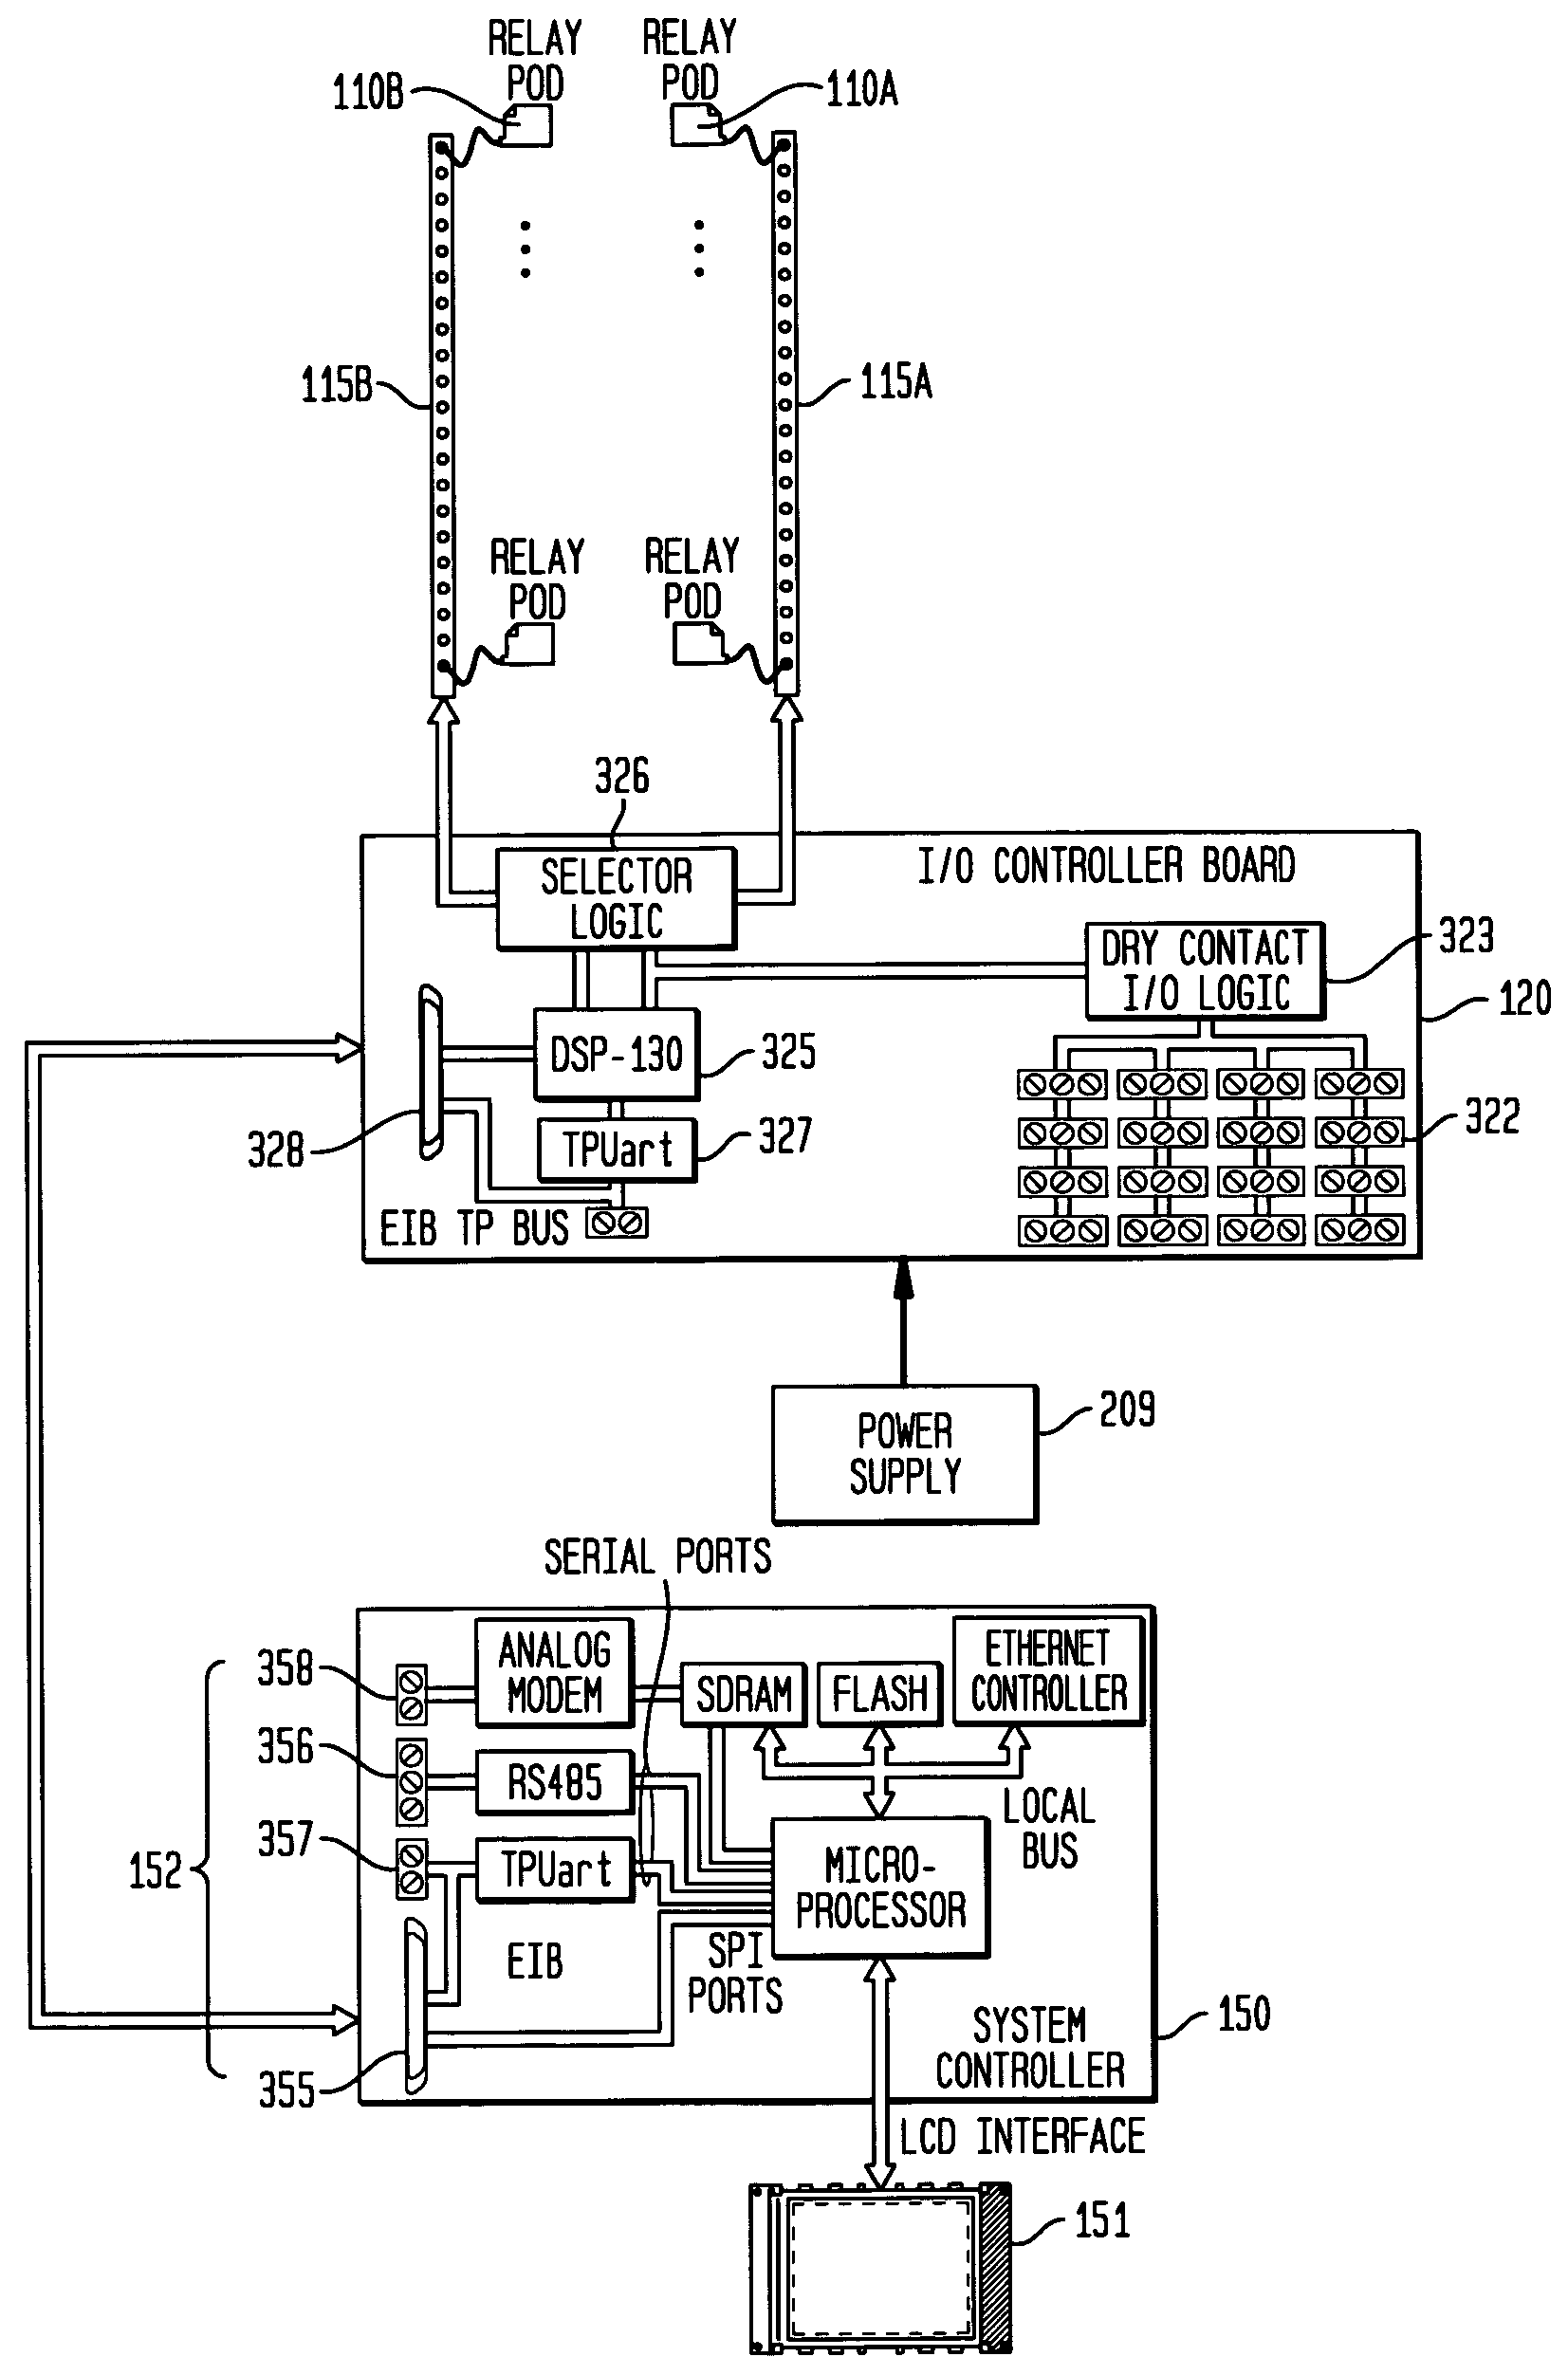 Selection line and serial control of remote operated devices in an integrated power distribution system